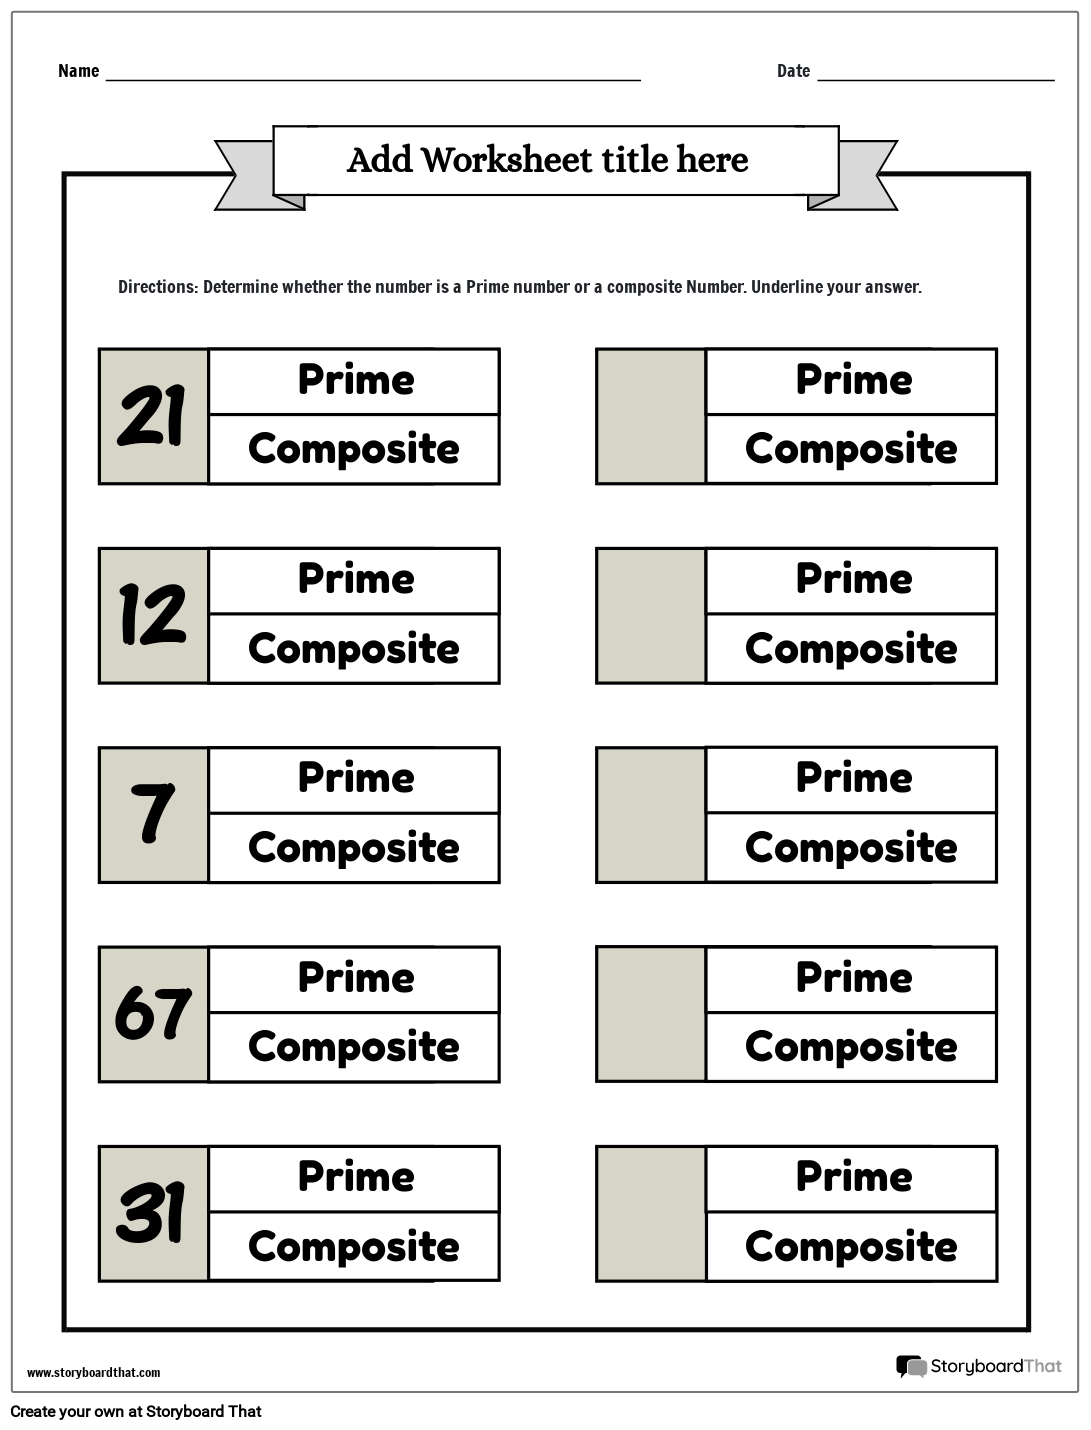 Determining Prime and Composite numbers Worksheet